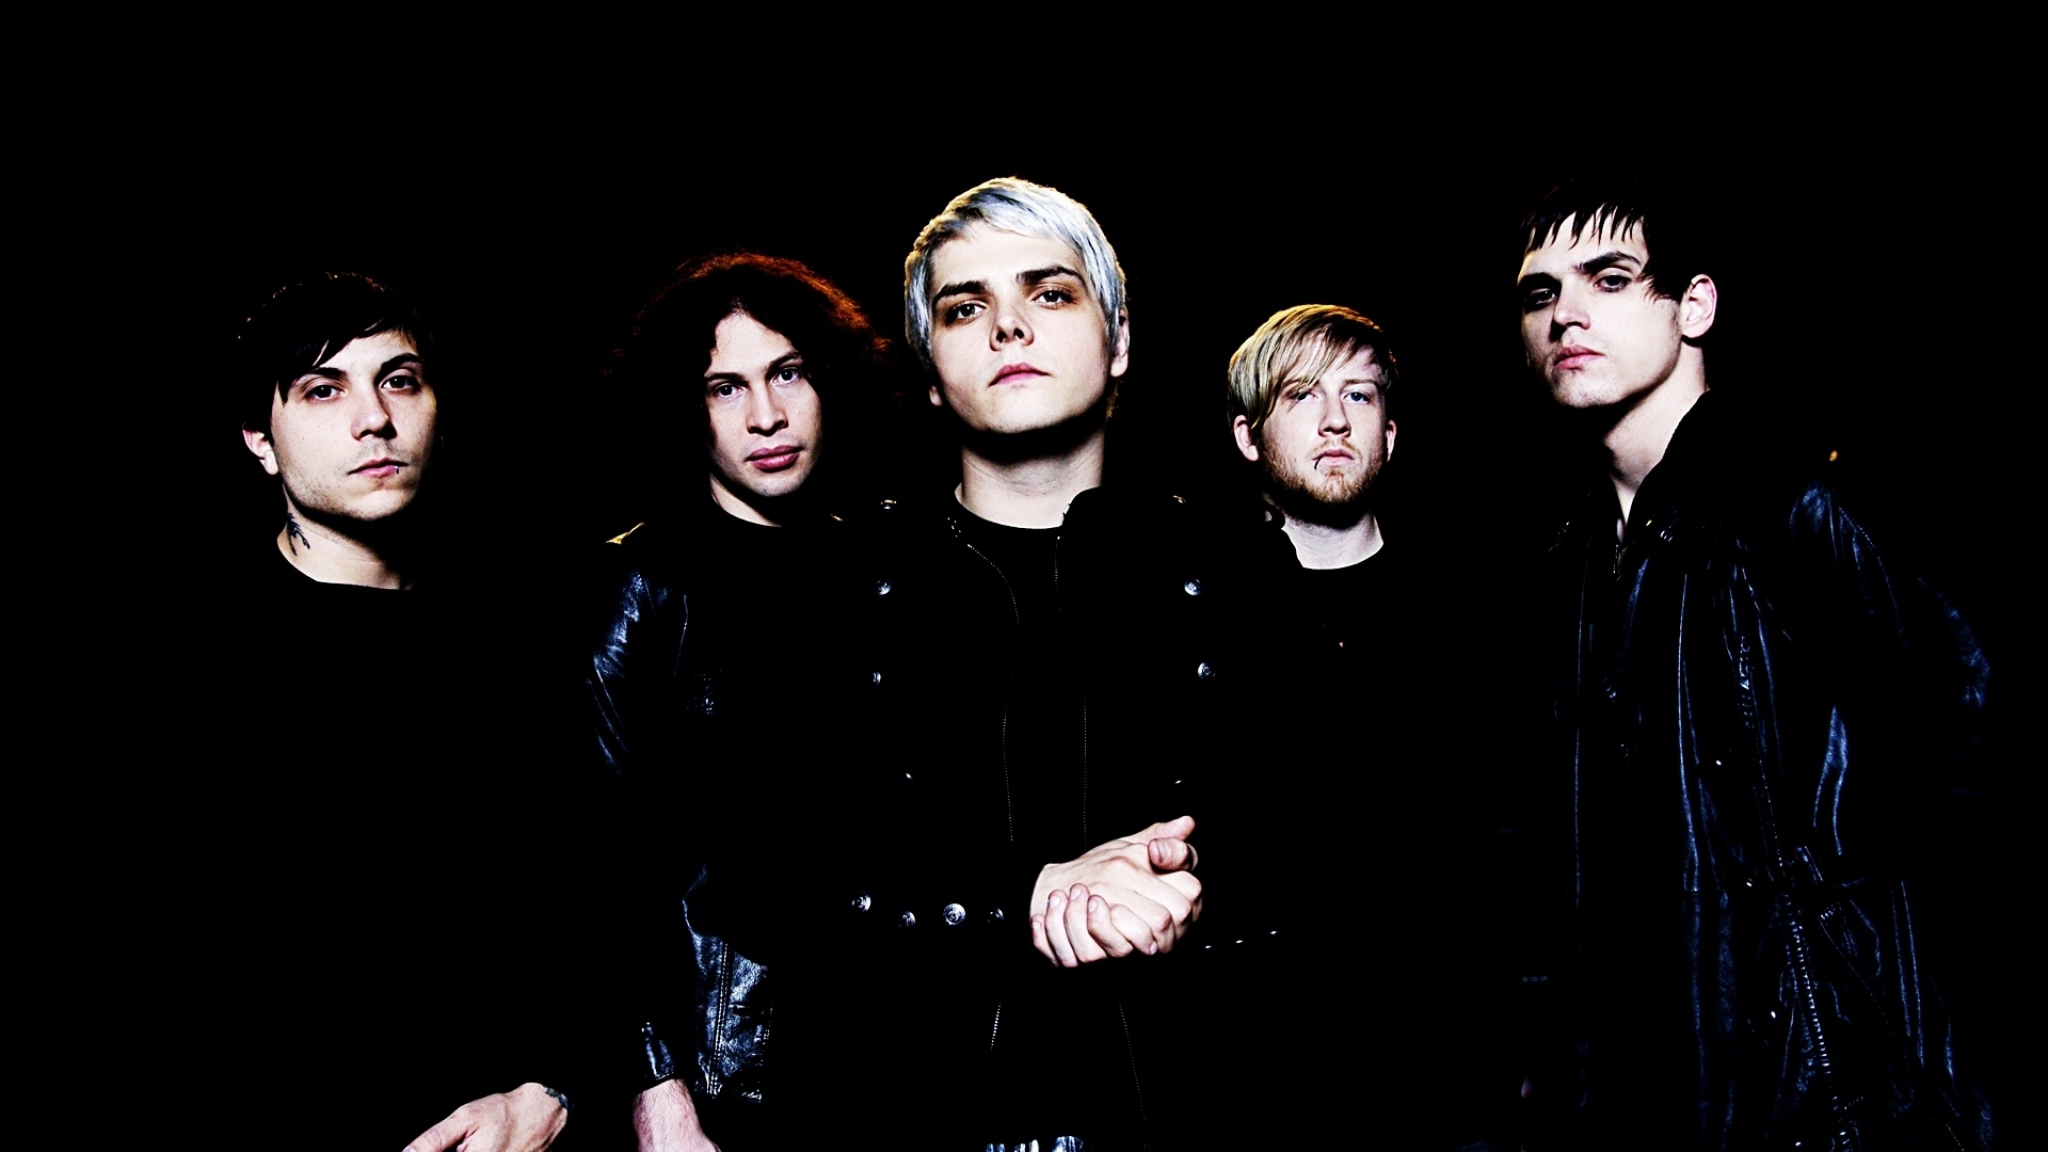 Download Wallpaper 2048x1152 My chemical romance, Band, Members ...